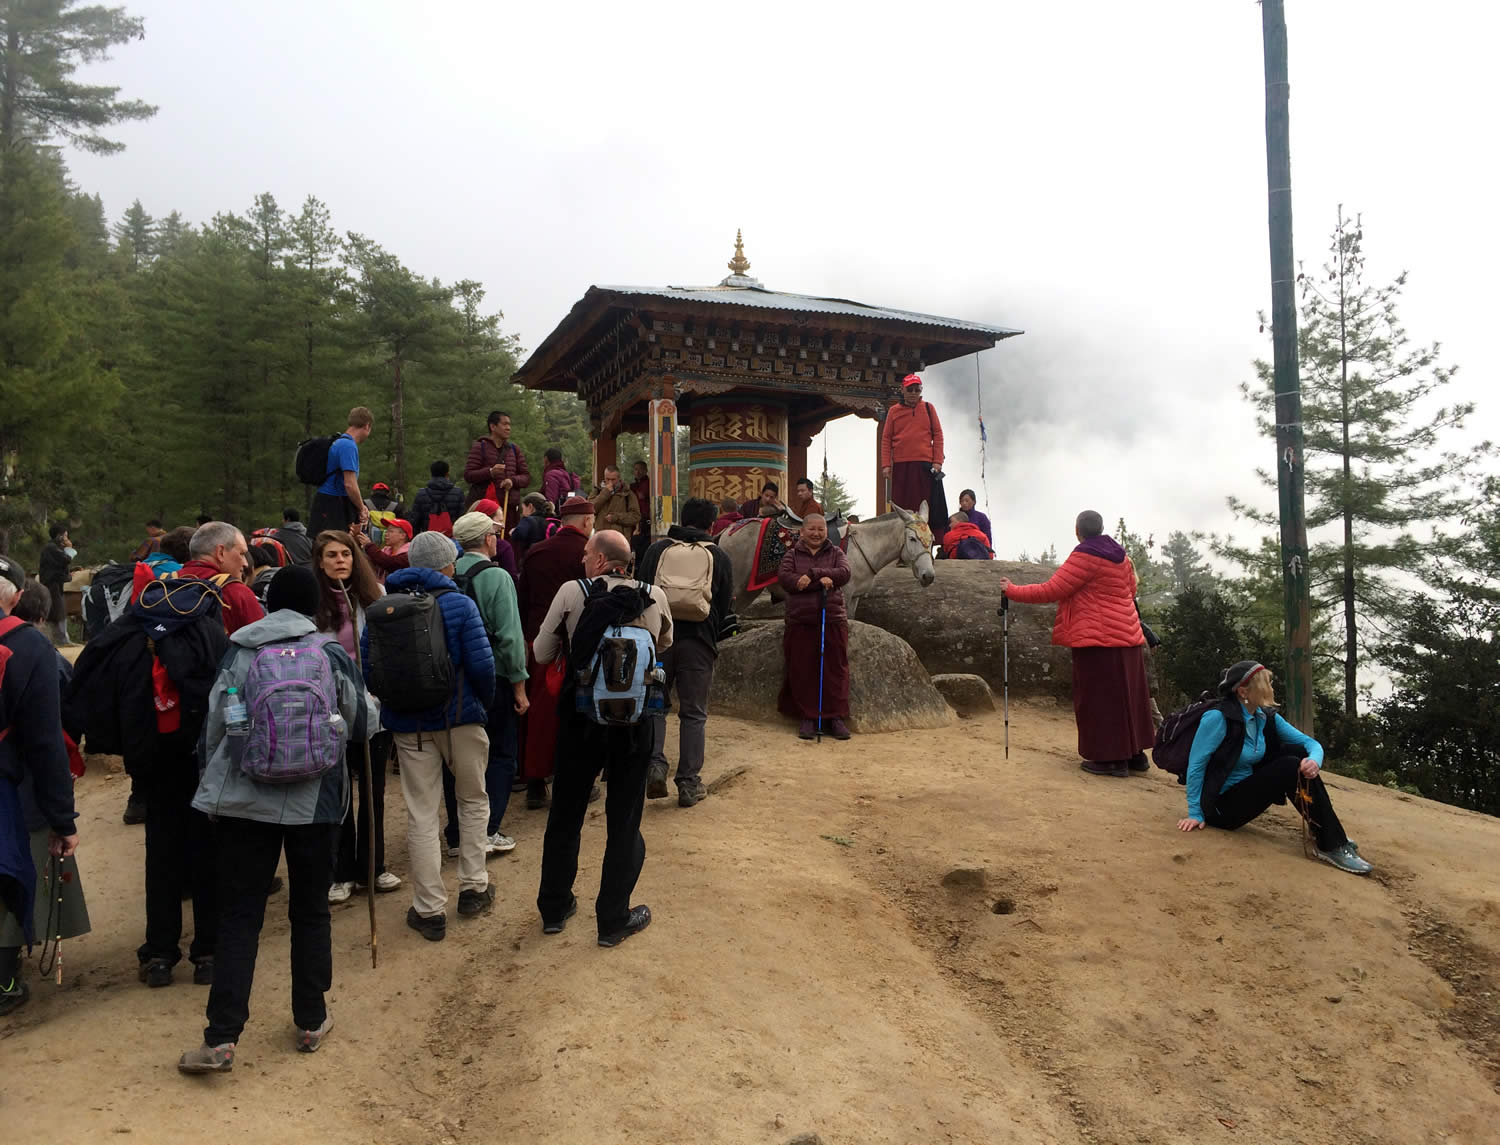 Rinpoche and hikers resting at the half-way point to Taktsang.